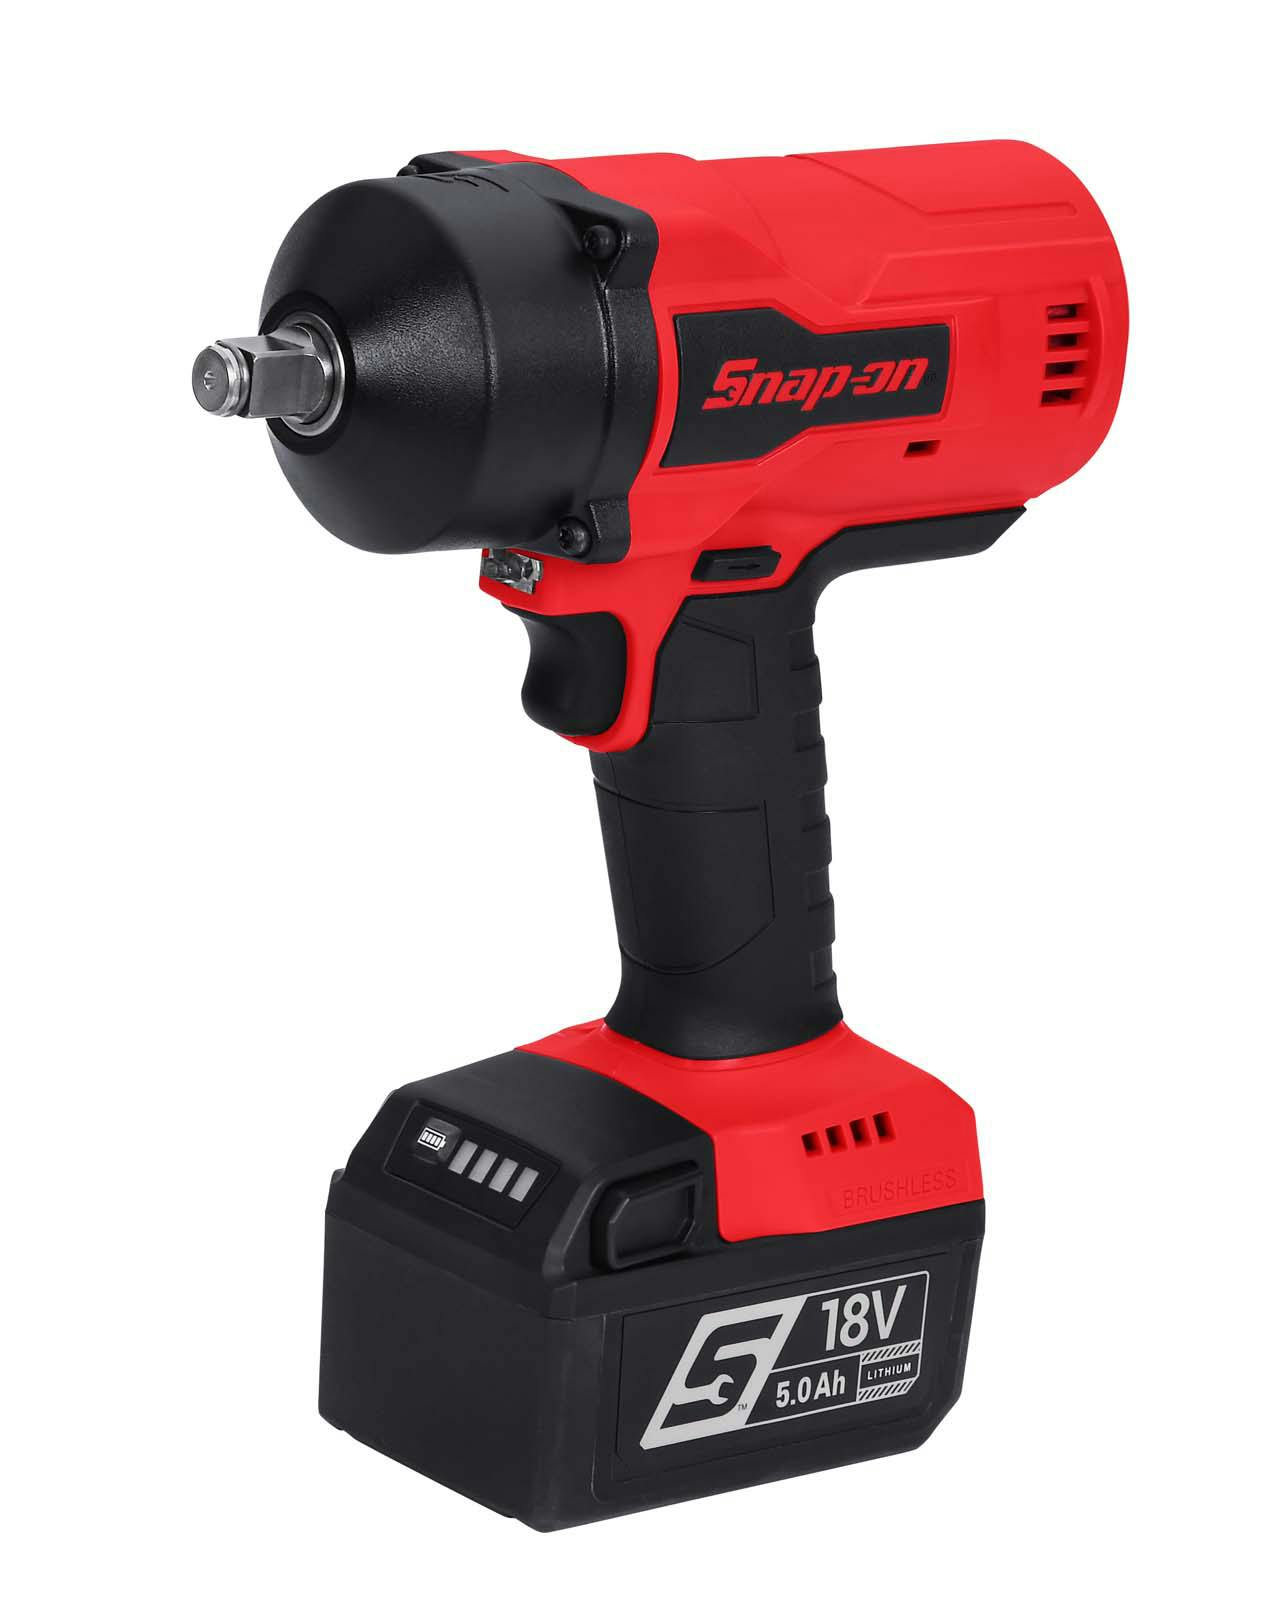 18 V 1/2 Drive MonsterLithium Cordless Impact Wrench (One Battery) (Red) -  Snap-on Industrial